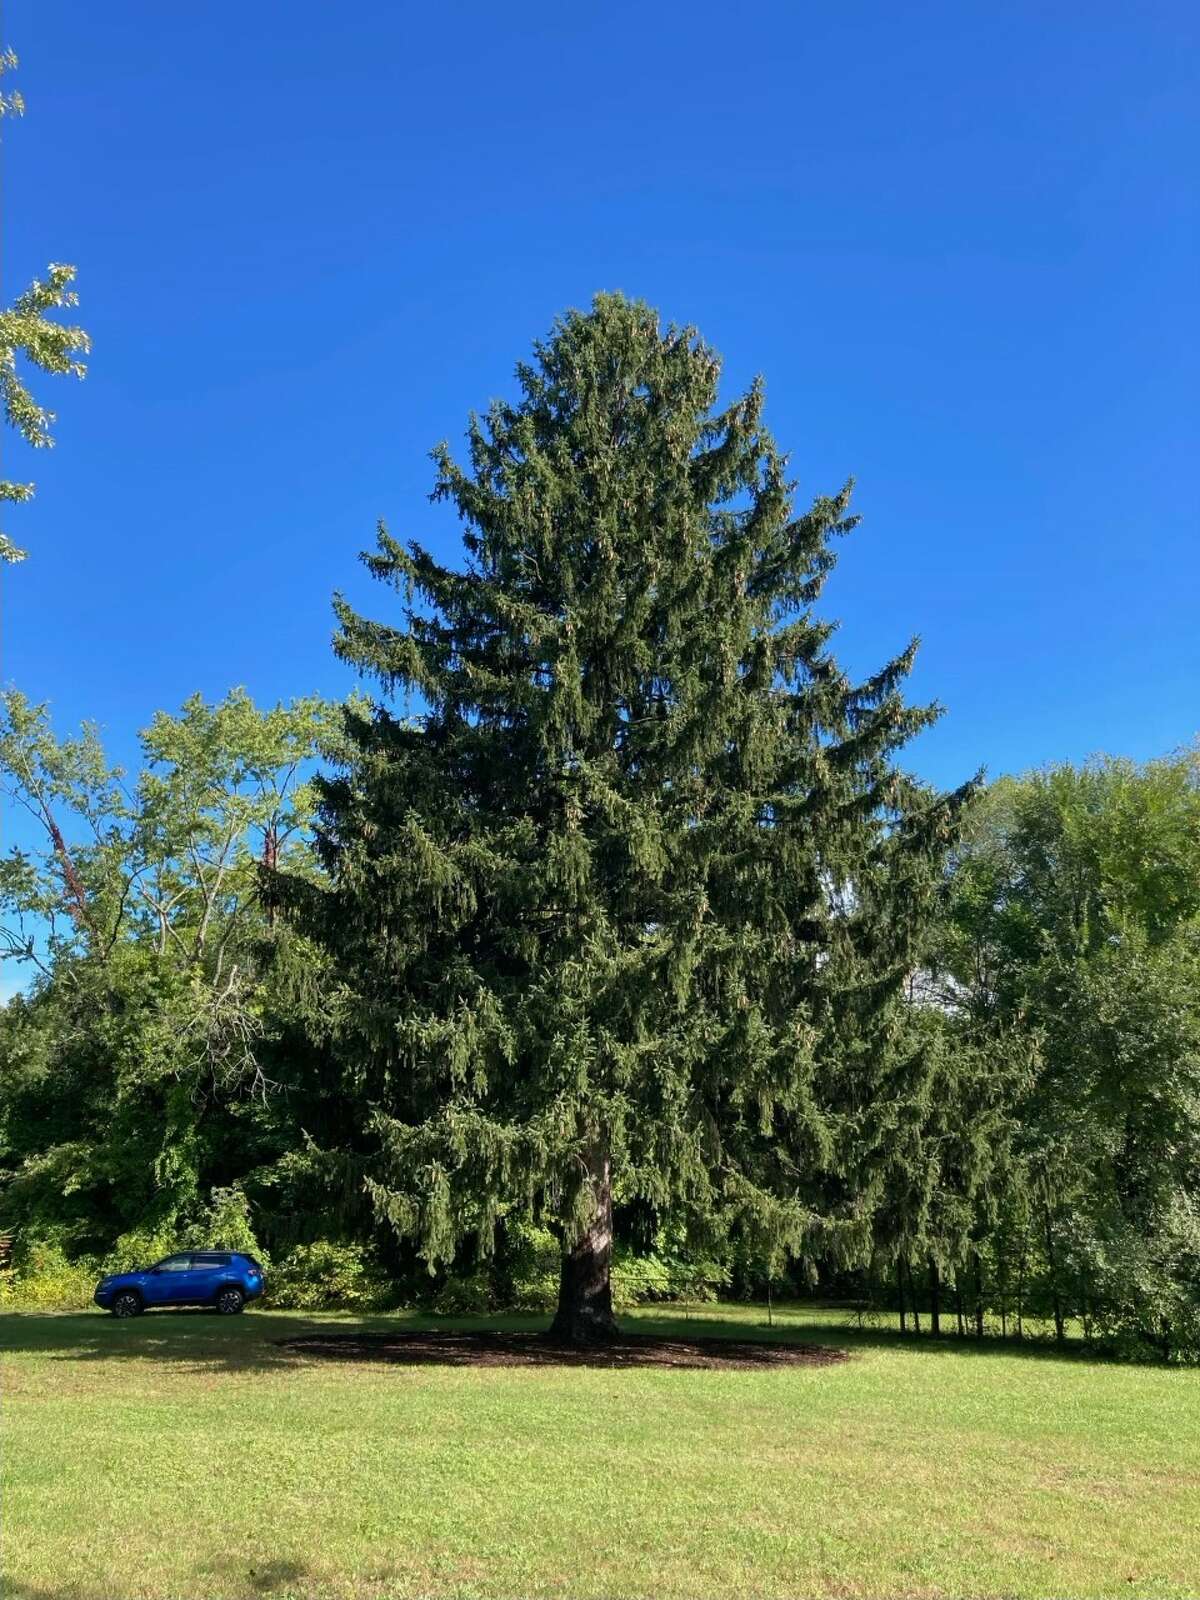 The 2022 Rockefeller Center Christmas Tree is a 82-foot spruce currently in Queensbury and will be donated by the Lebowitz family of Glens Falls. (Provided by Tishman Speyer)